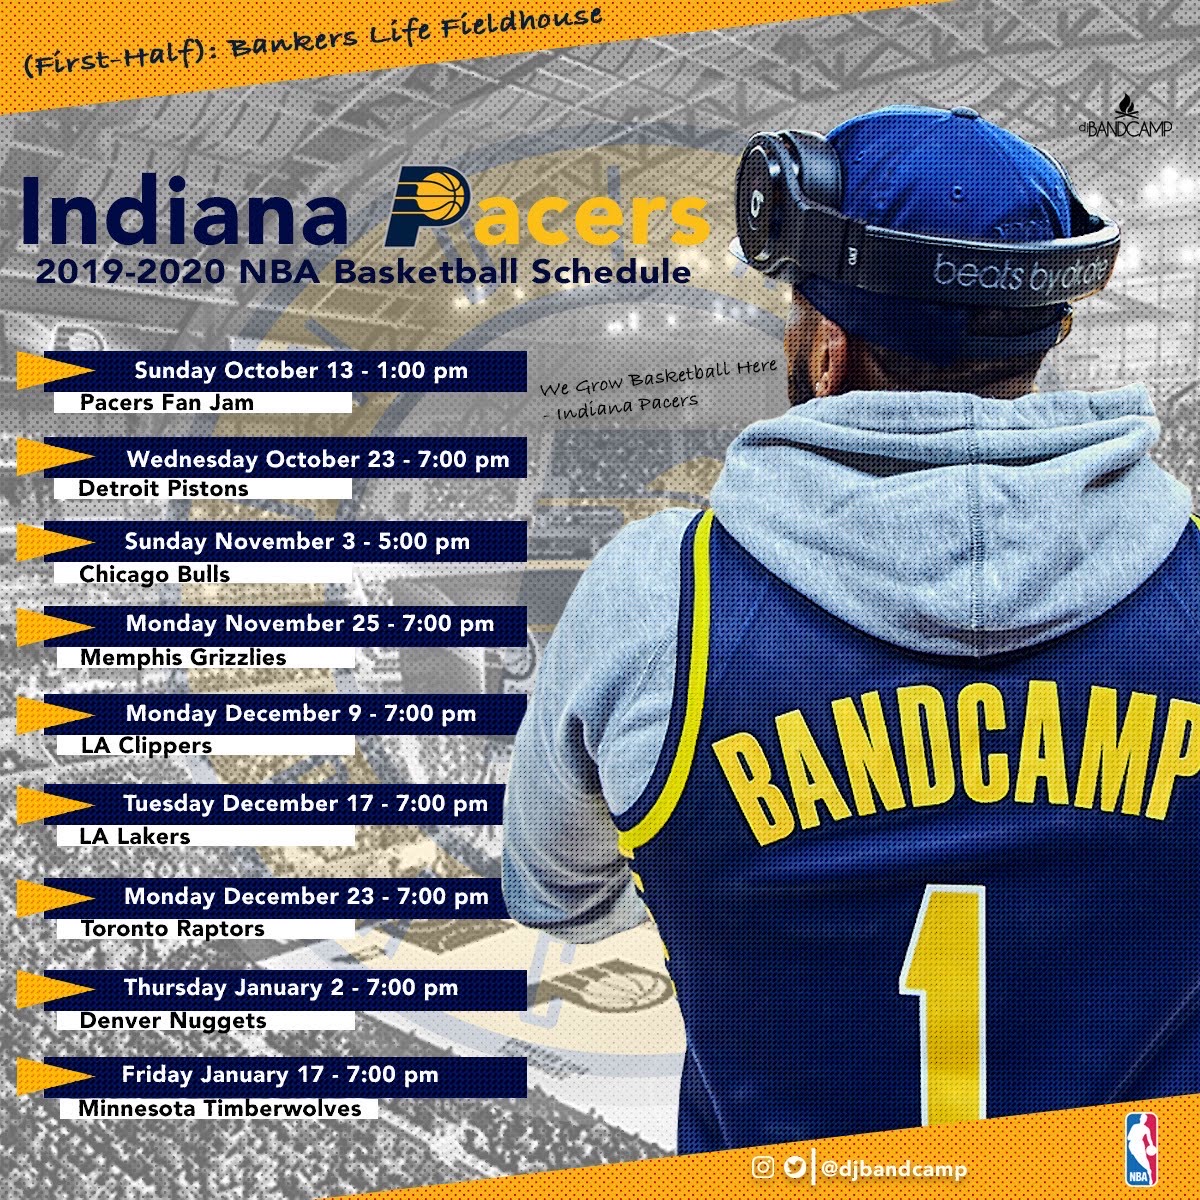 DJ Bandcamp’s 20192020 Indiana Pacers NBA Basketball Schedule (First